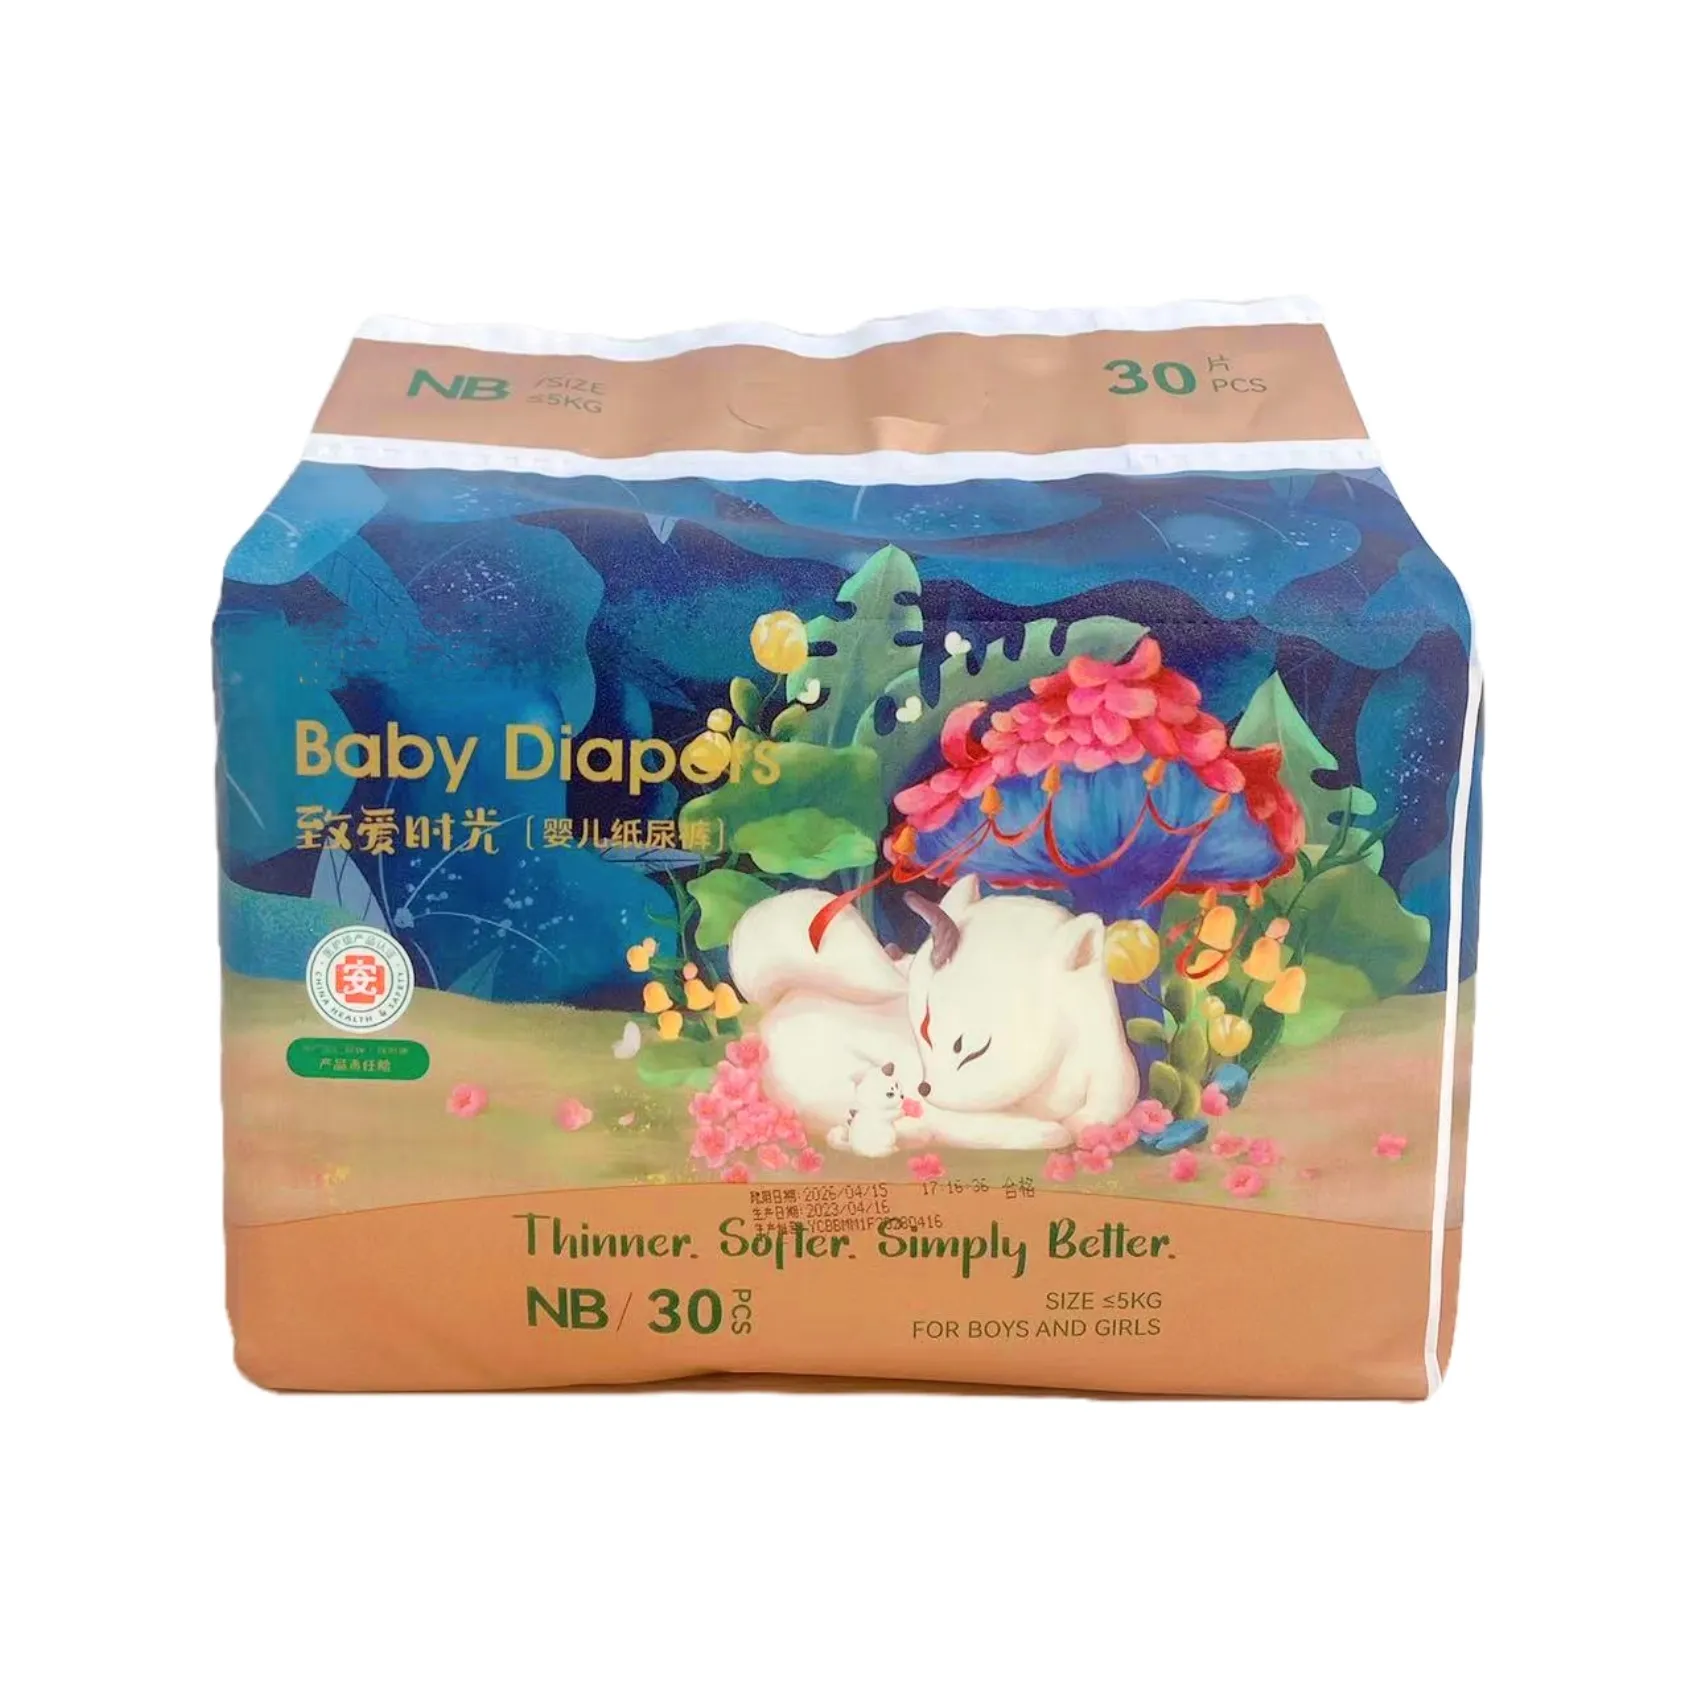 A Grade Tape Baby Nappies Babies Diapers sizes Newborn 1 2 3 4 5 6 NB S M L XL XXL Disposable Premium OEM ODM